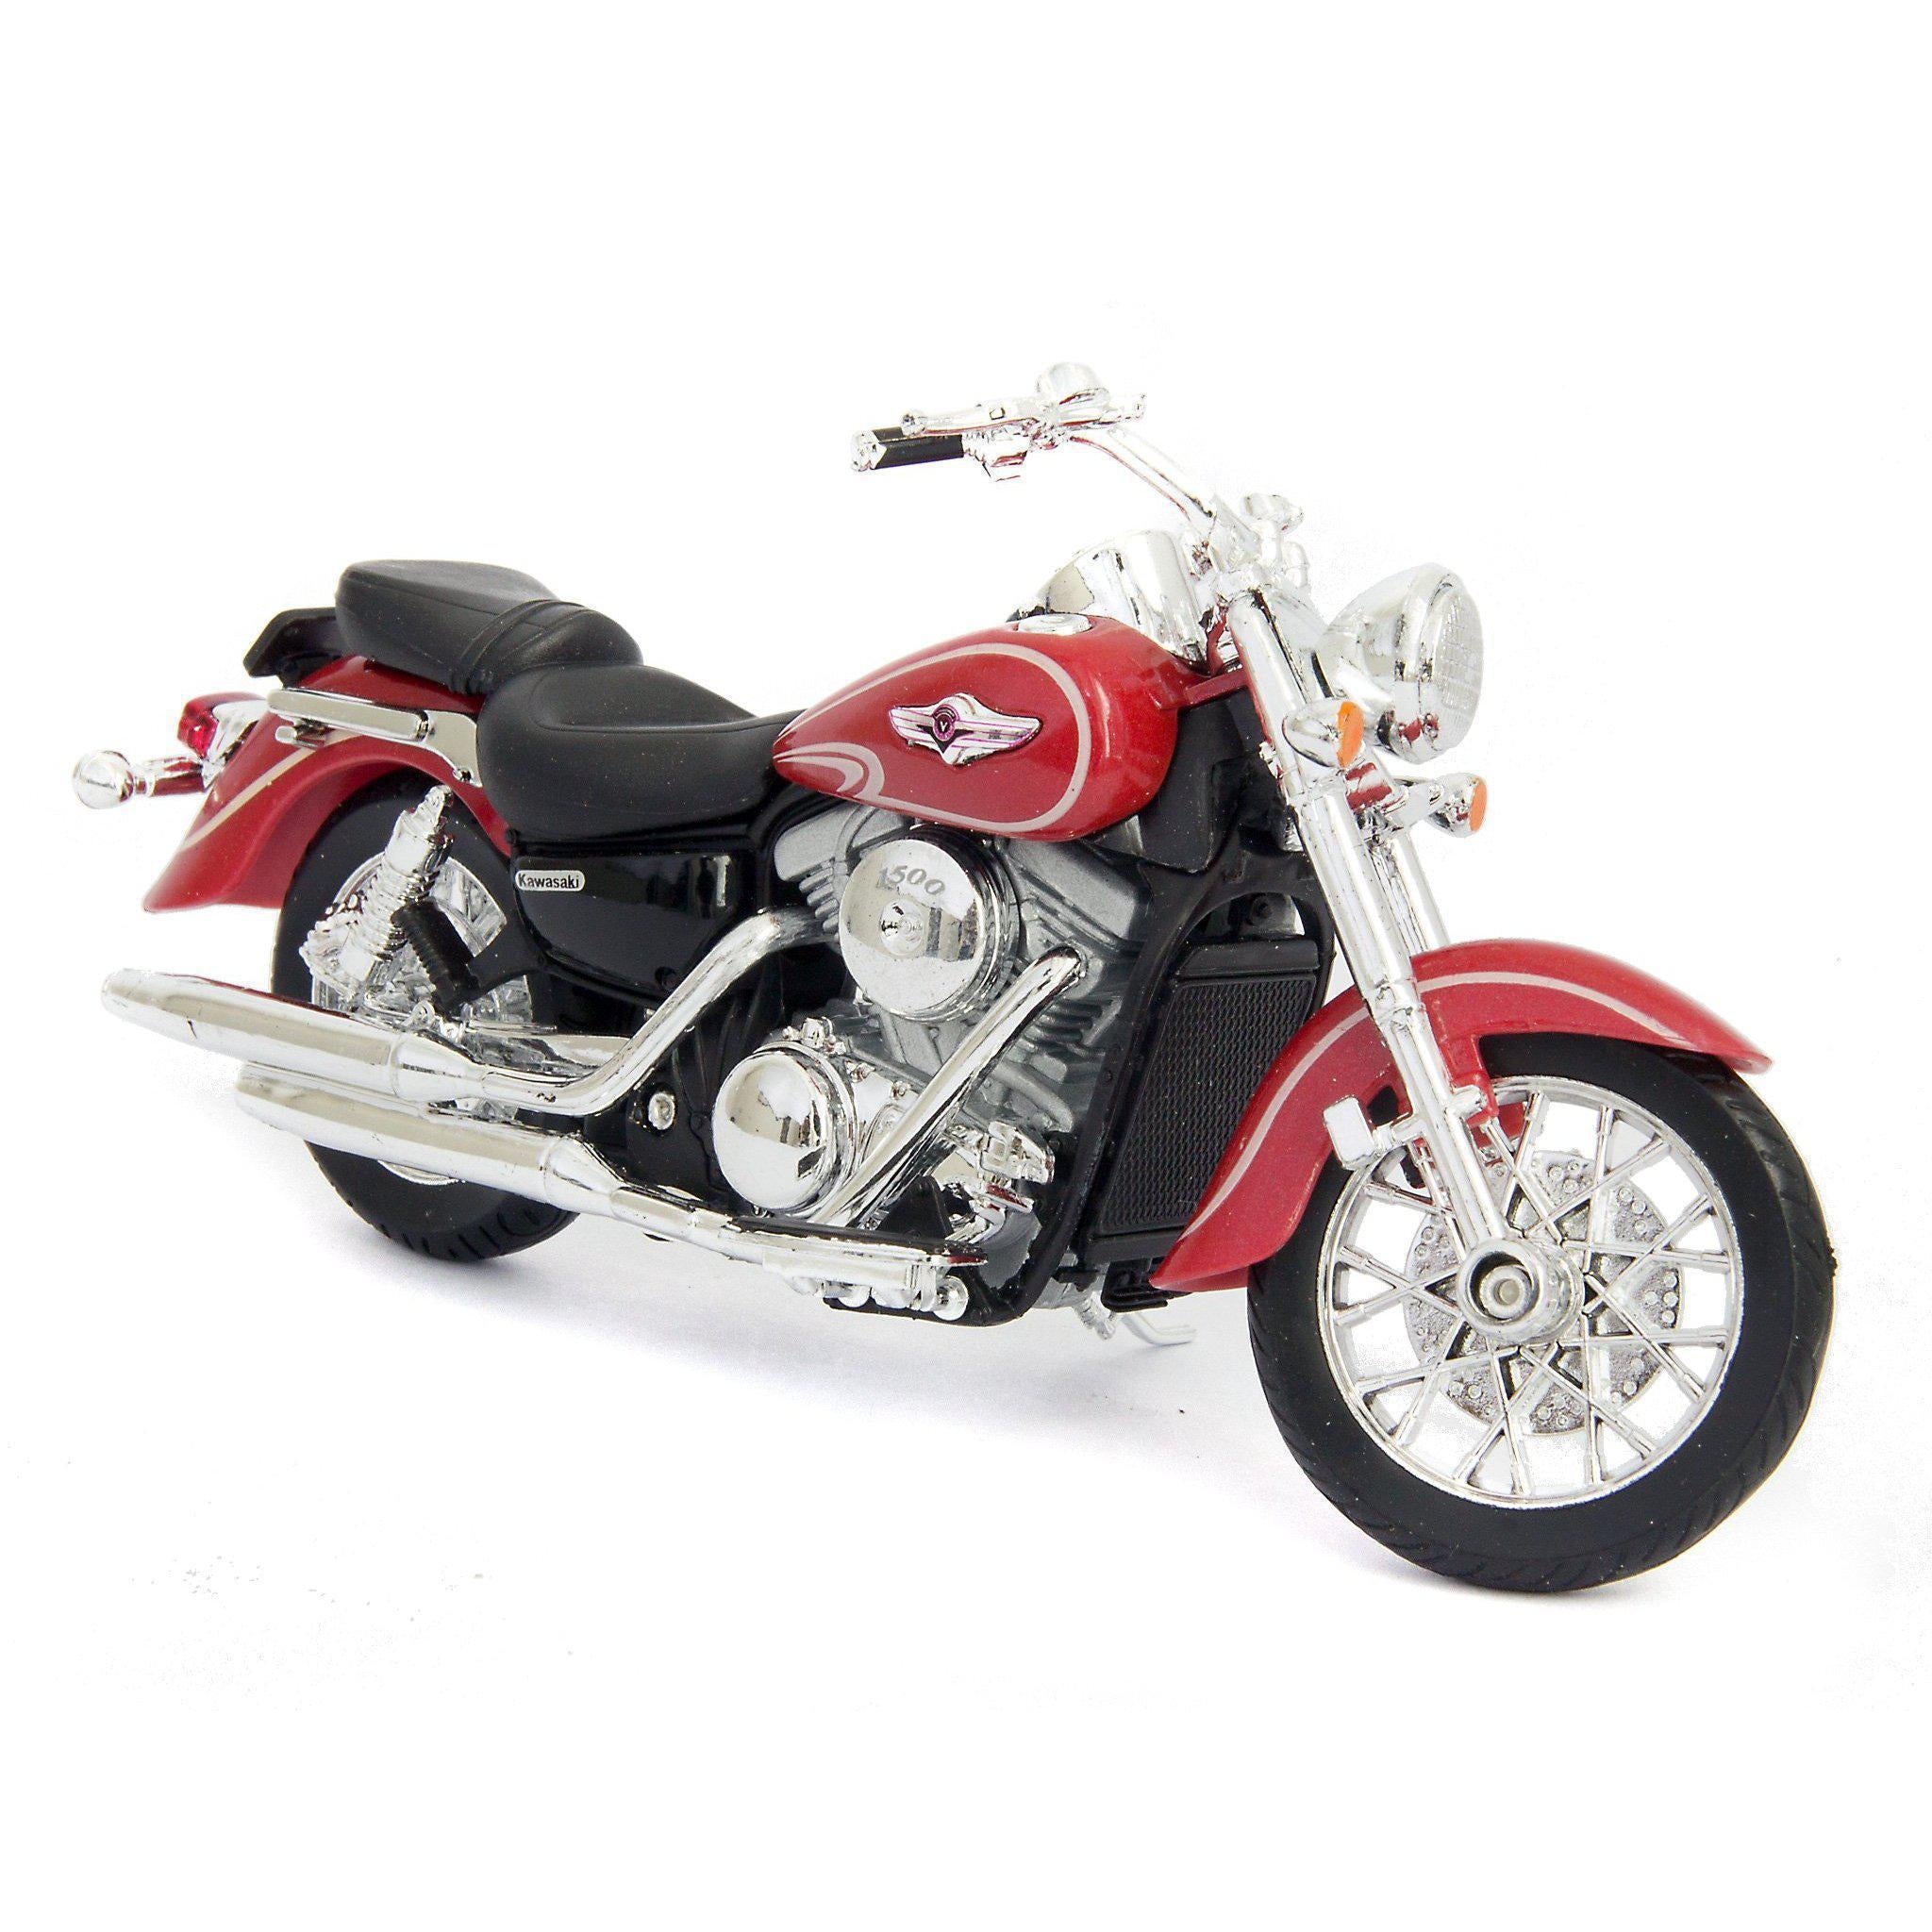 Kawasaki Vulcan 1500 Classic Diecast Model Motorcycle 2002 - 1:18 Scale-Welly-Diecast Model Centre